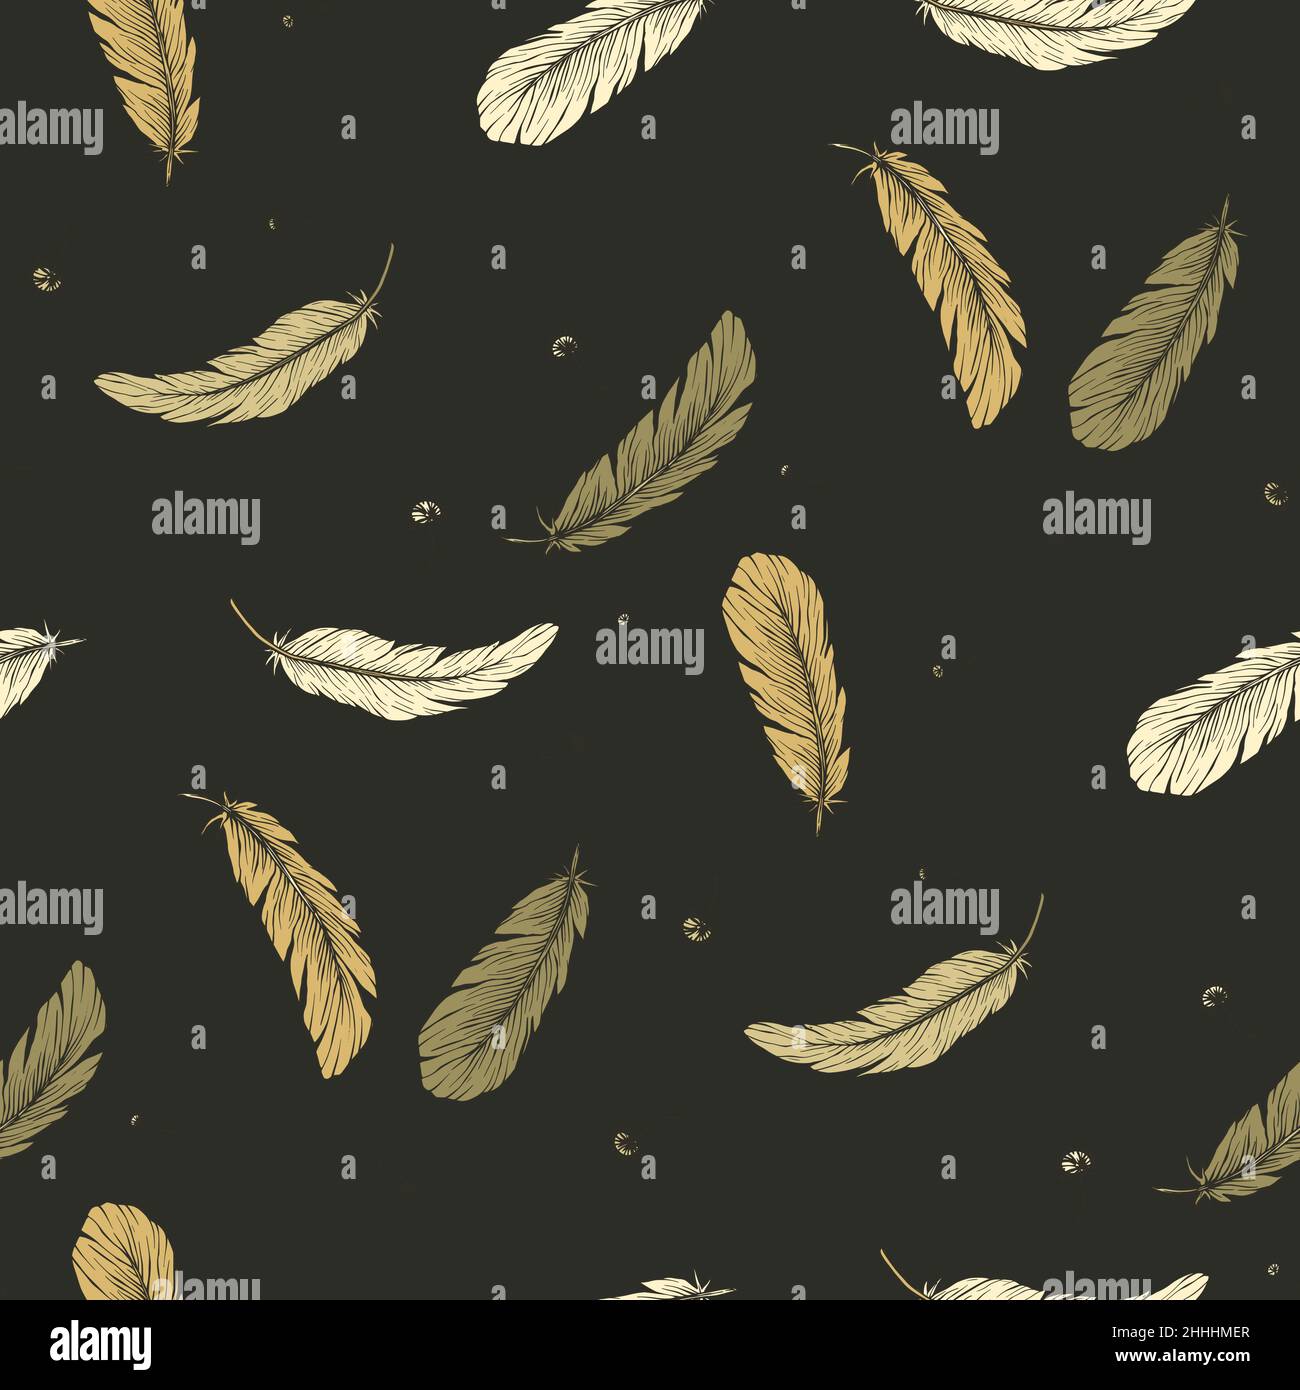 Bird feather boho vintage floral seamless pattern Stock Vector